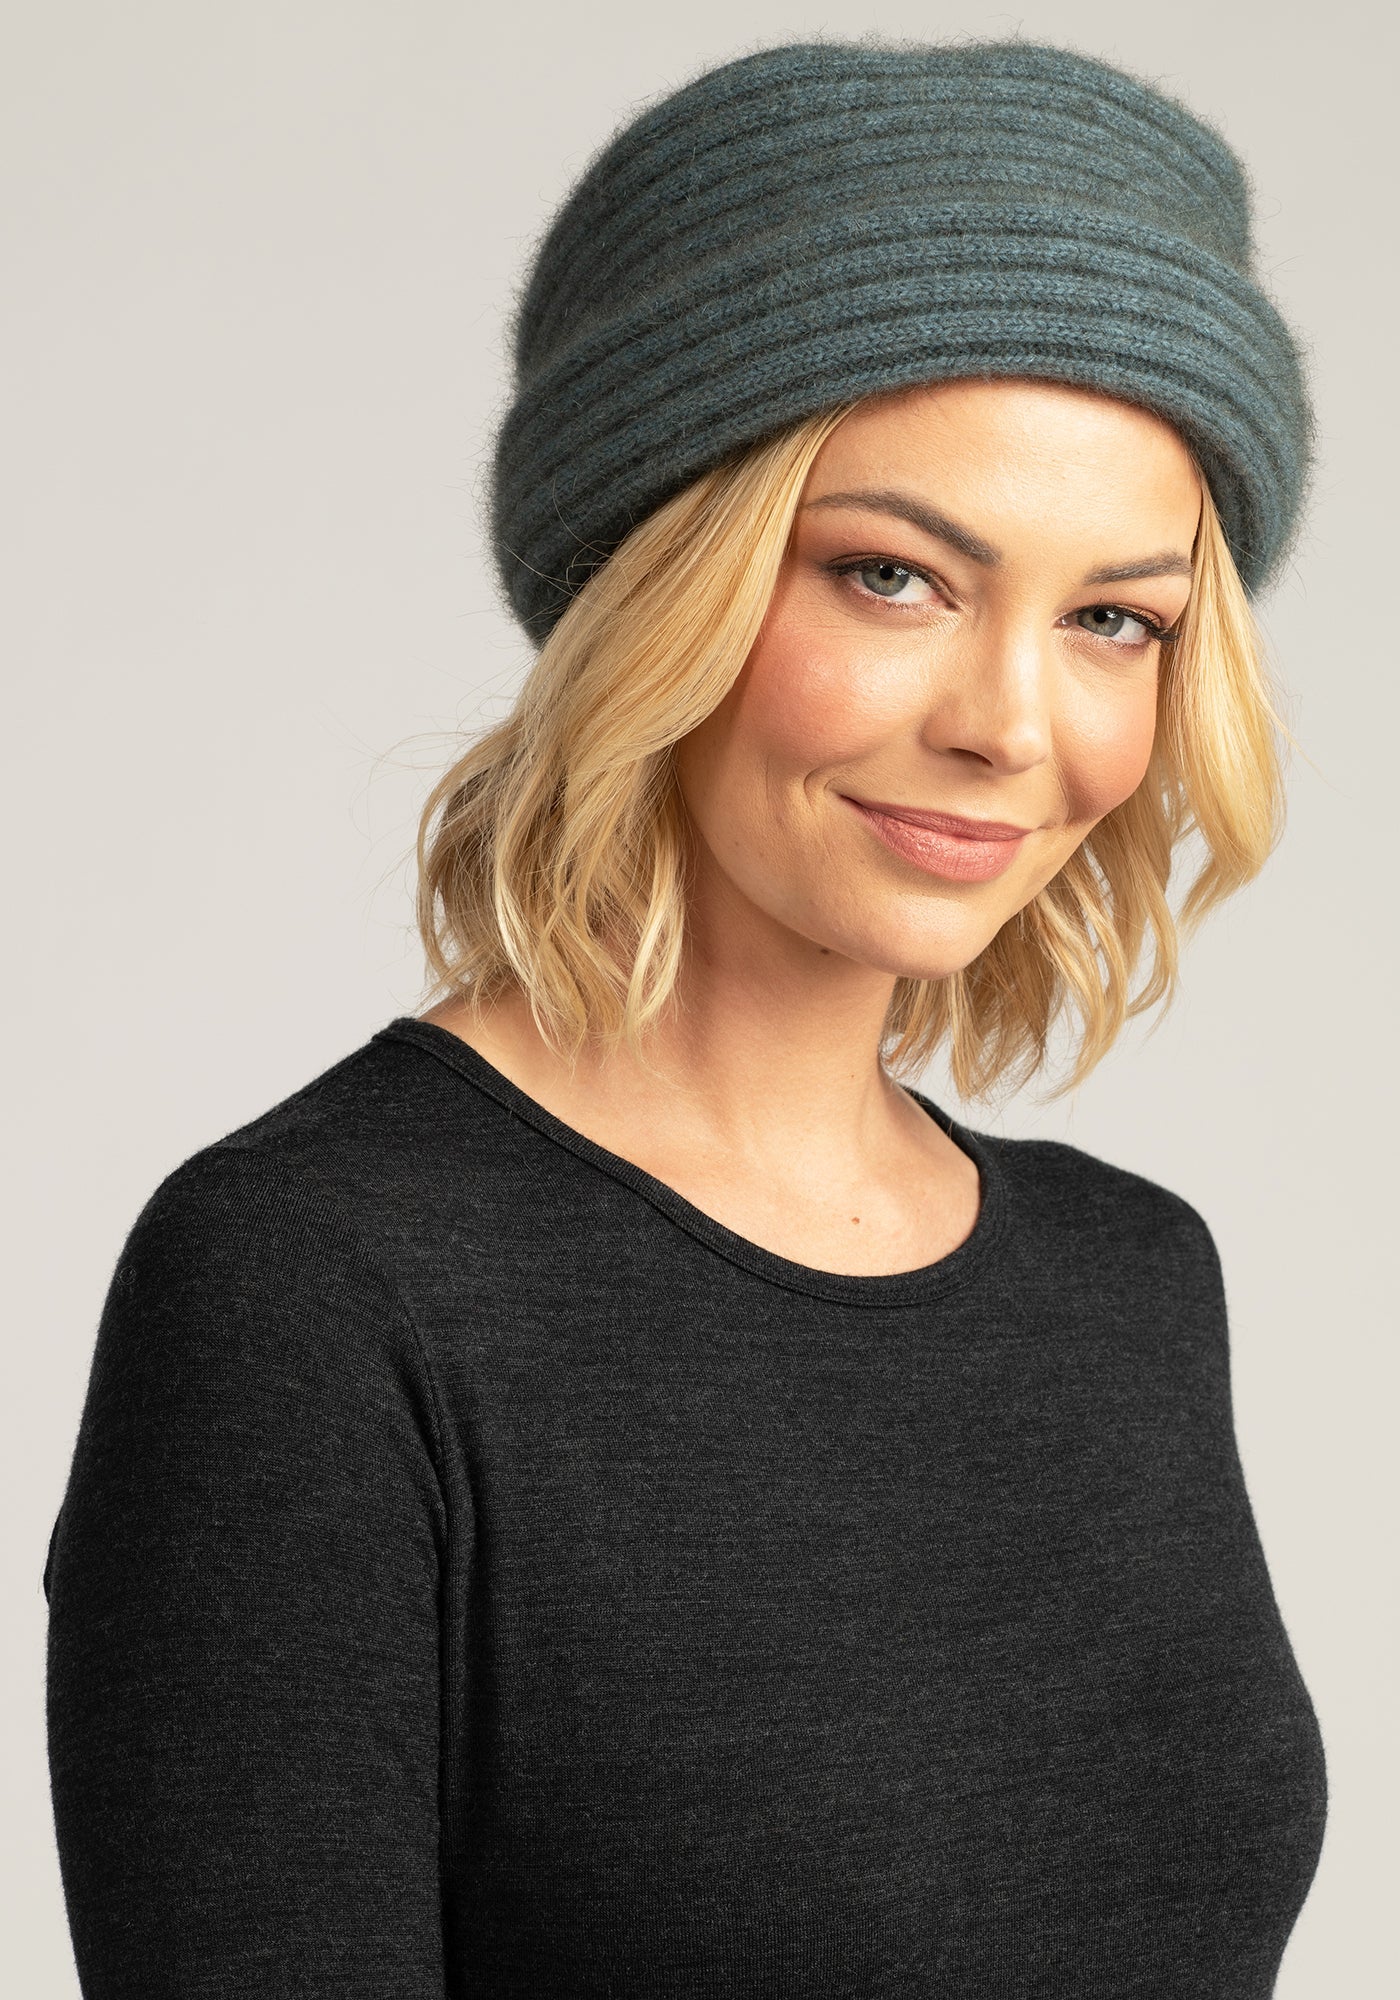 Stay cozy in style with our Merino Knit Beanie. Warmth meets fashion in classic grey. Shop now!